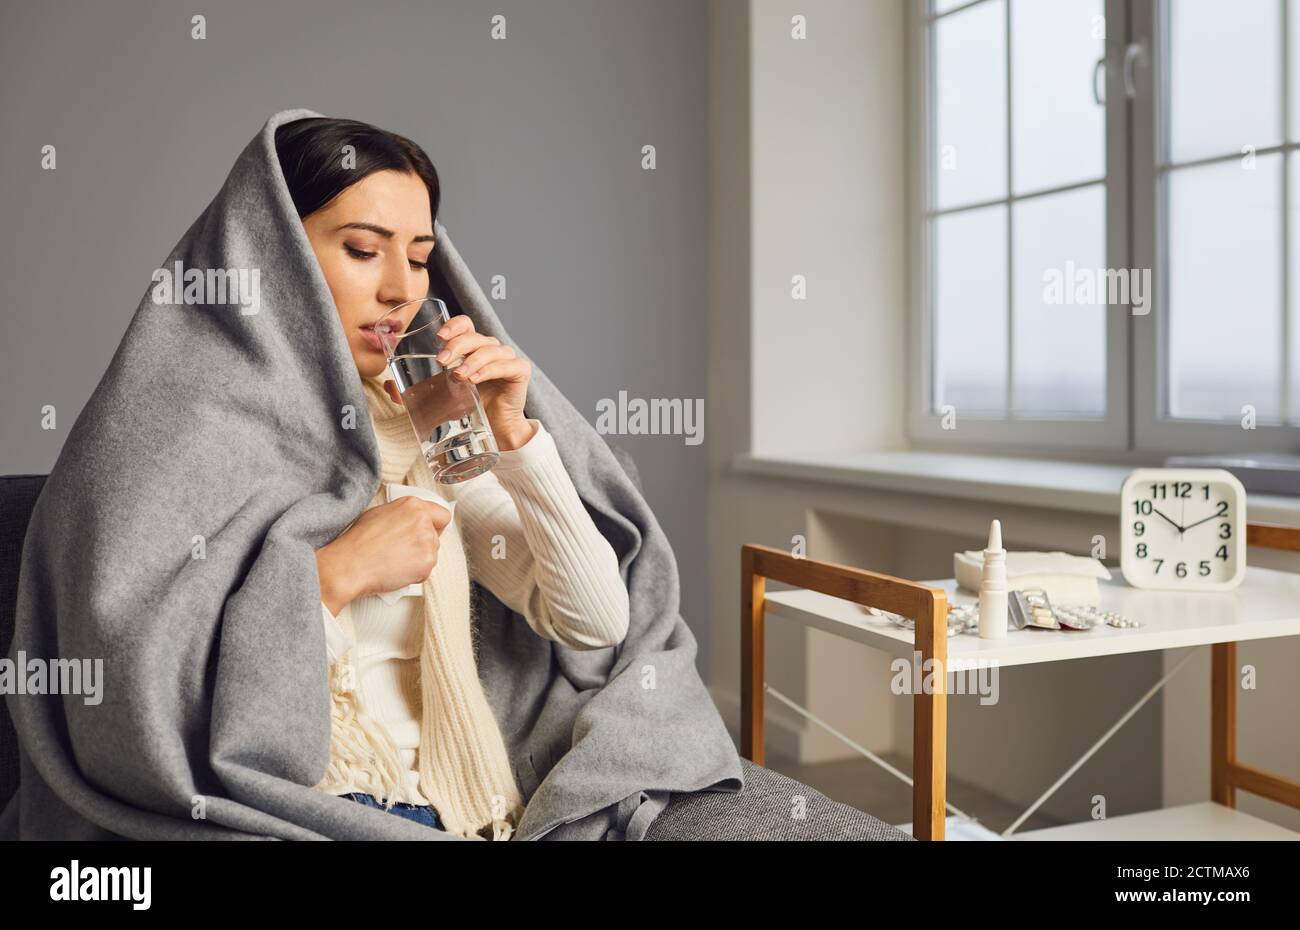 Side view of young woman in blanket caught cold and taking flu medicine, drinking water. Stock Photo